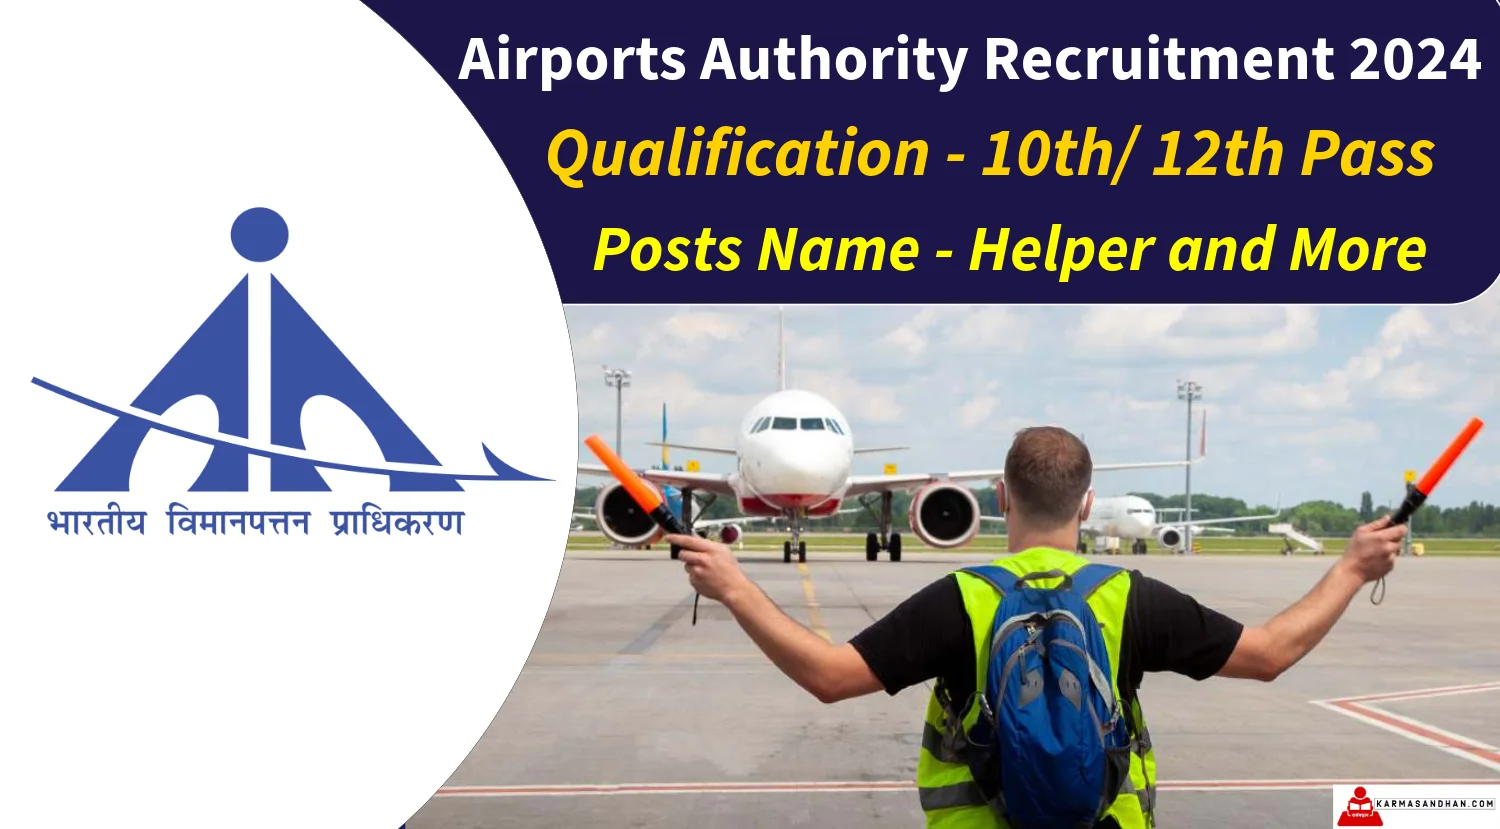 Airports Authority of India Recruitment 2024 for Helper and More Vacancies